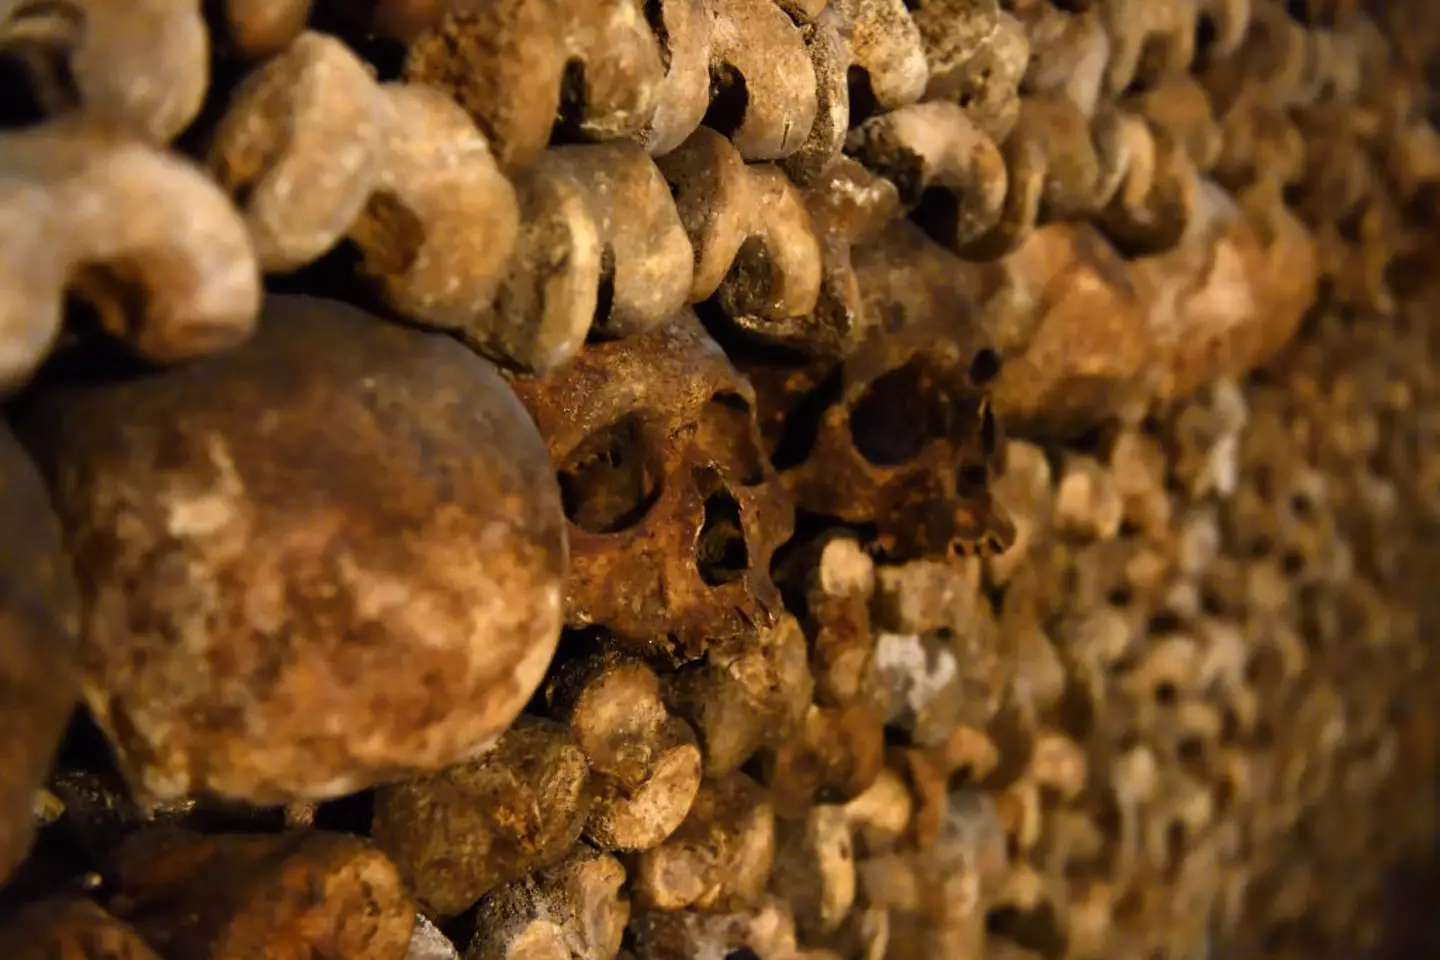 The catacombs in Paris aren't for the faint of hearted.